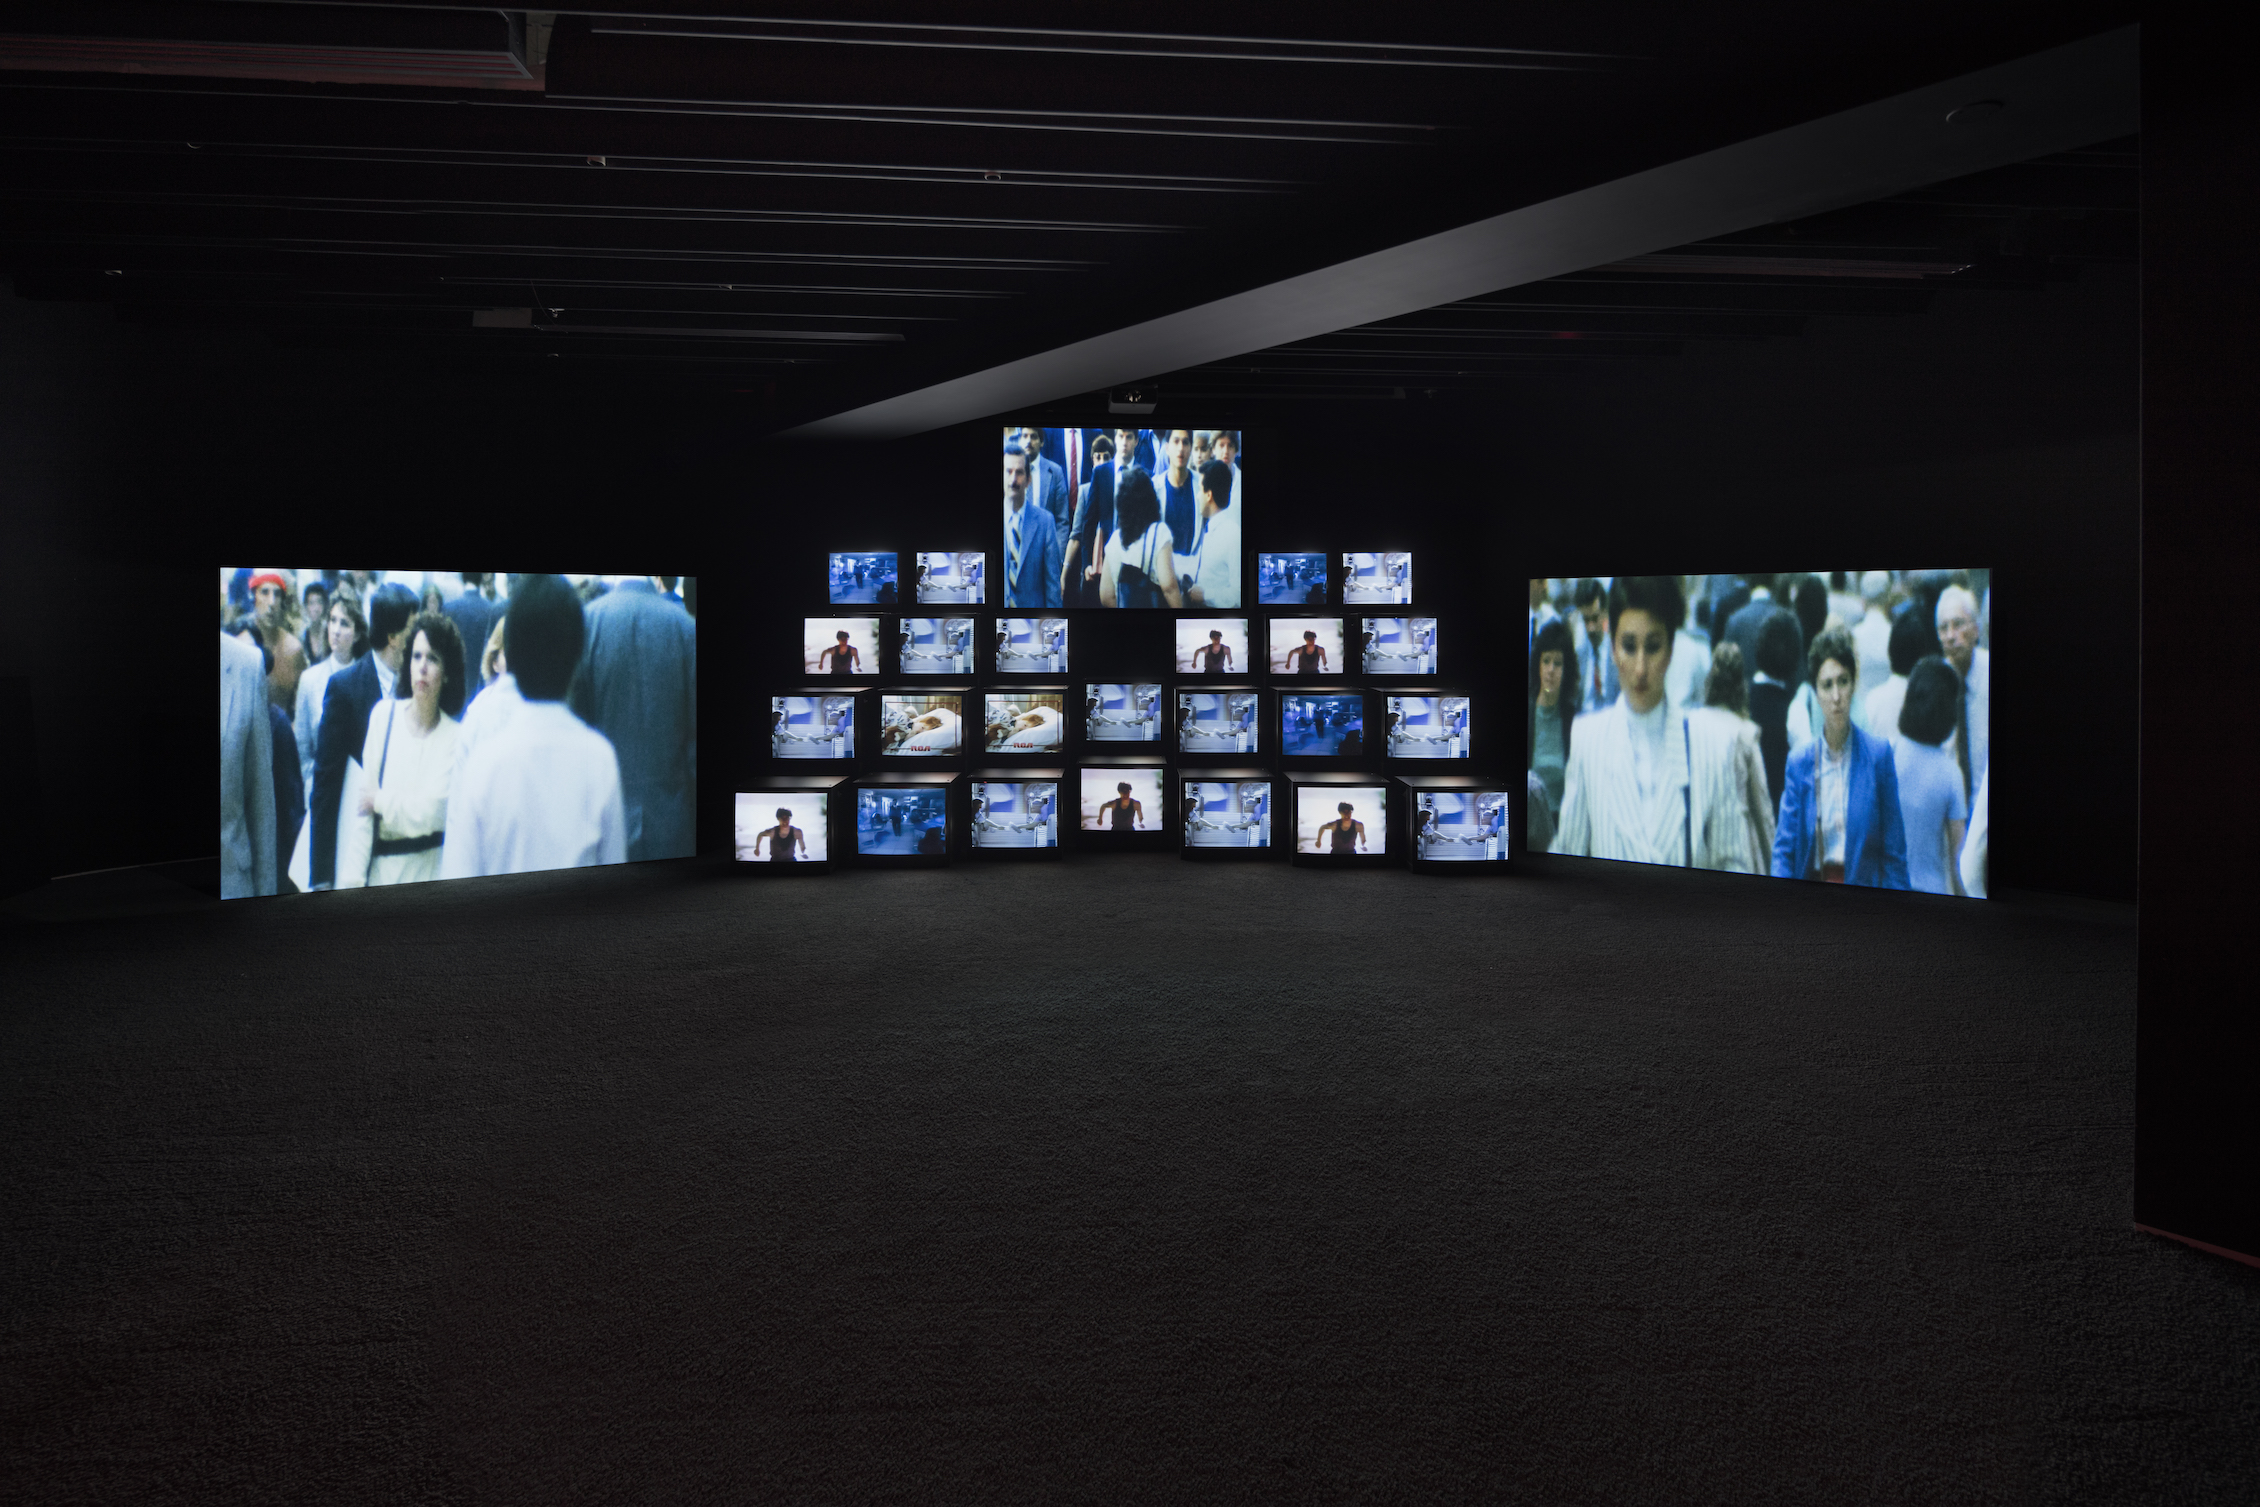 'Total Recall', 1987. 11-channel video installation on 24 monitors and 3 projection screens, 18.2 minutes, with soundtrack by Stuart Argabright. Installation view of 'Gretchen Bender: So Much Deathless' at Red Bull Arts New York, 2019. Photo by Lance Brewer. All artwork © The Gretchen Bender Estate. 